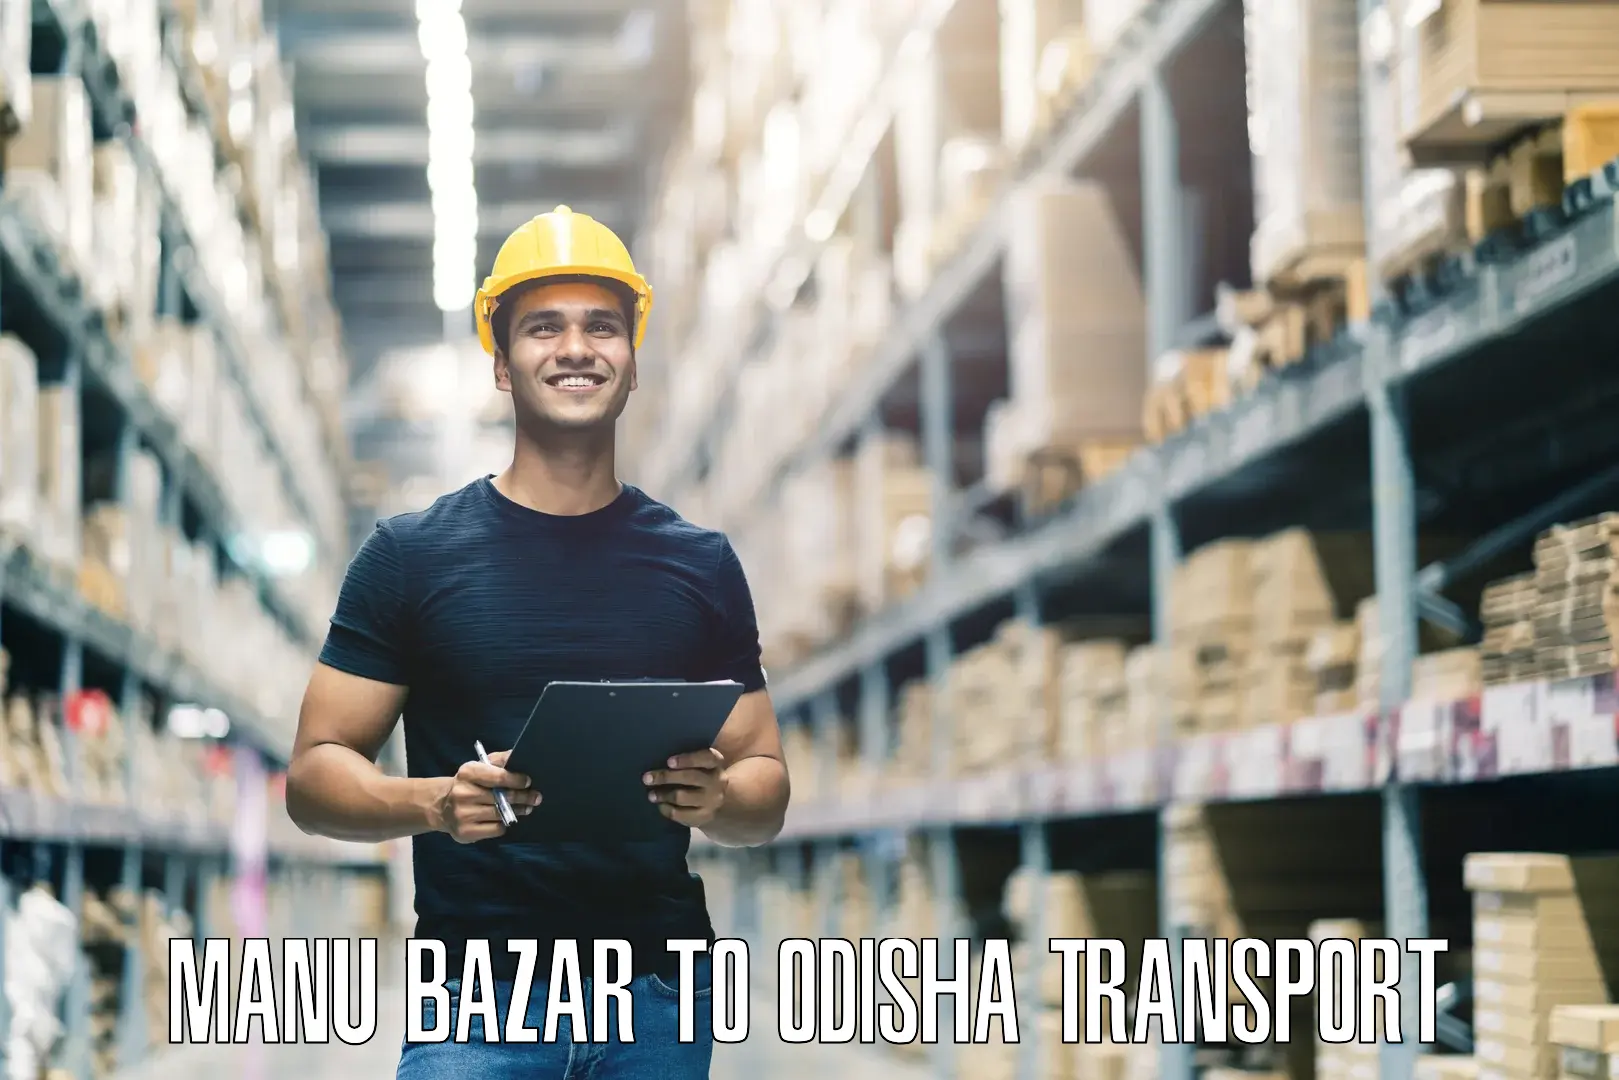 Package delivery services Manu Bazar to Odisha